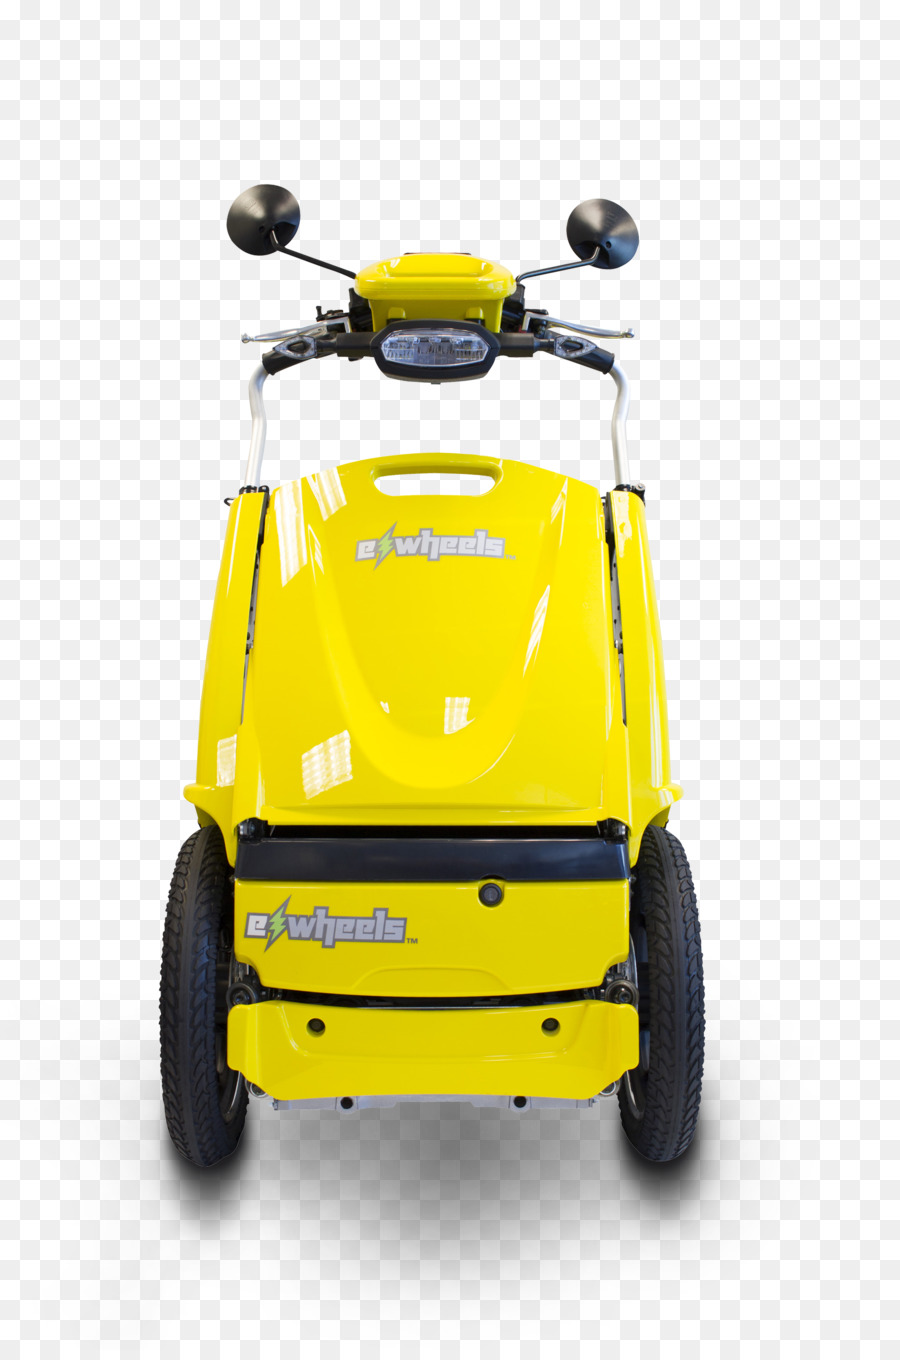 Scooters De Mobilidade，Scooter PNG